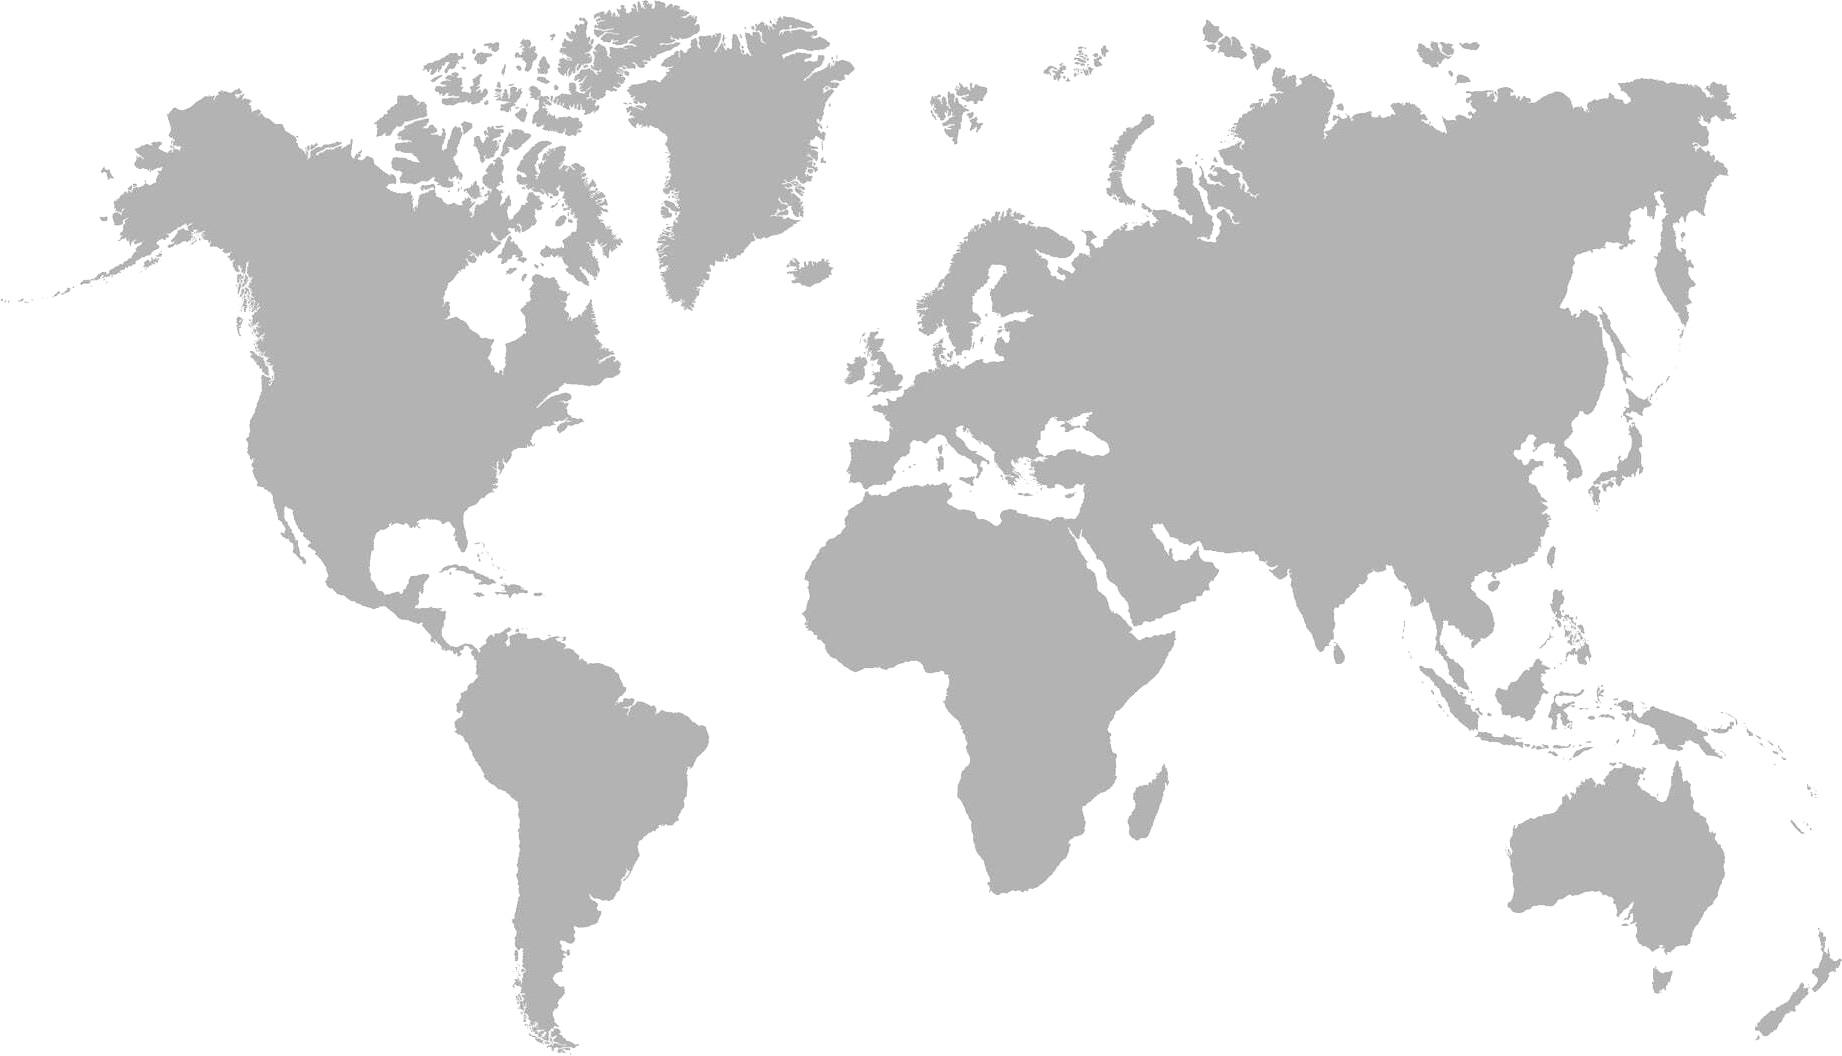 Image of the world map, without country boundaries or names